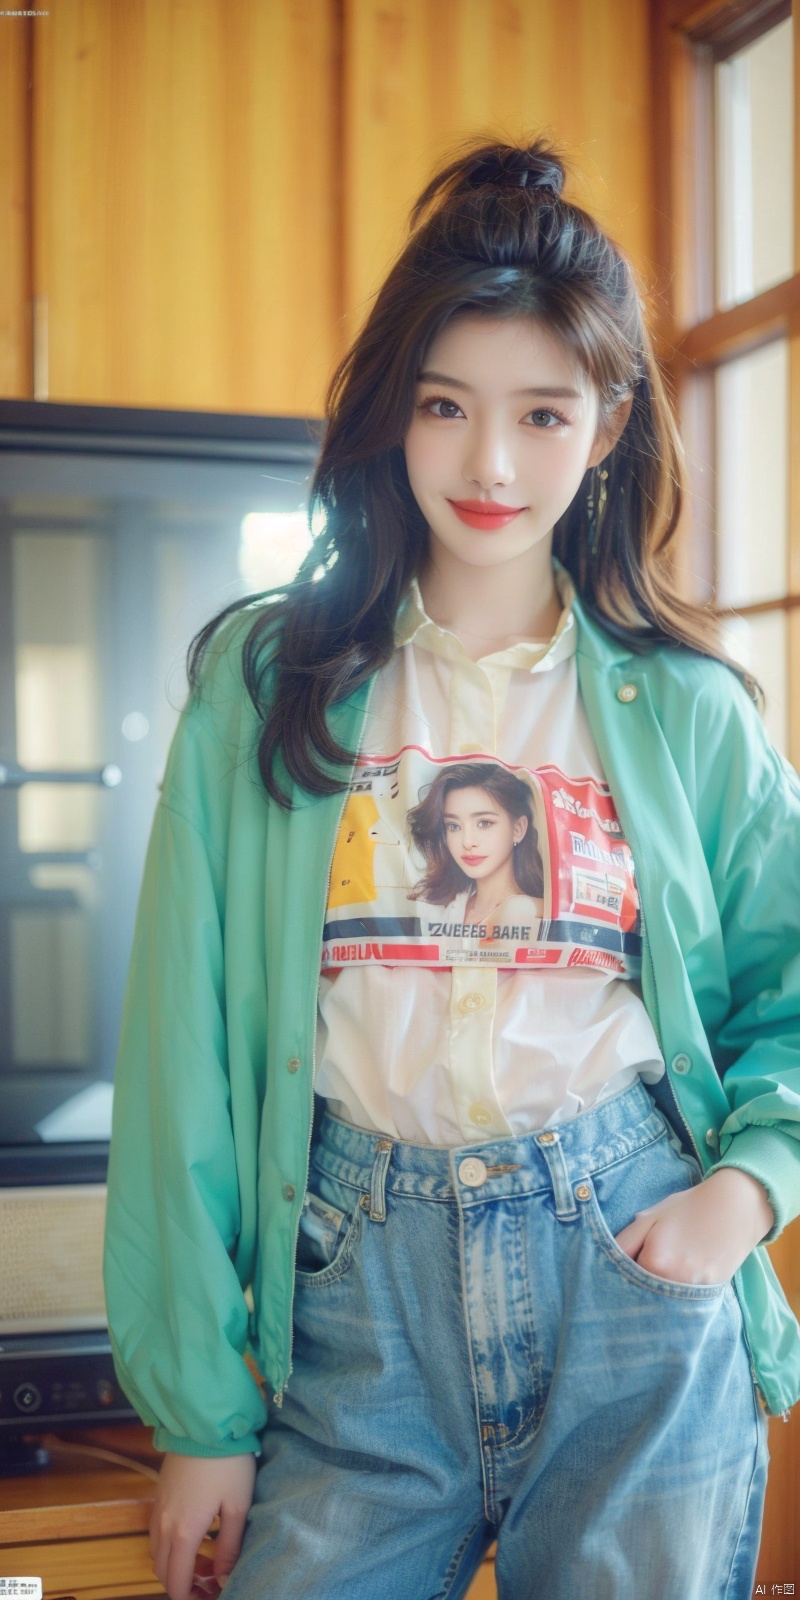  80sDBA style, fashion, (magazine: 1.3), (cover style: 1.3),Best quality, masterpiece, high-resolution, 4K, 1 girl, smile, exquisite makeup,shirt,jean,jacket , lace, tv,boombox
, wangzuxian, zhangmin, aomei, kelala, anni